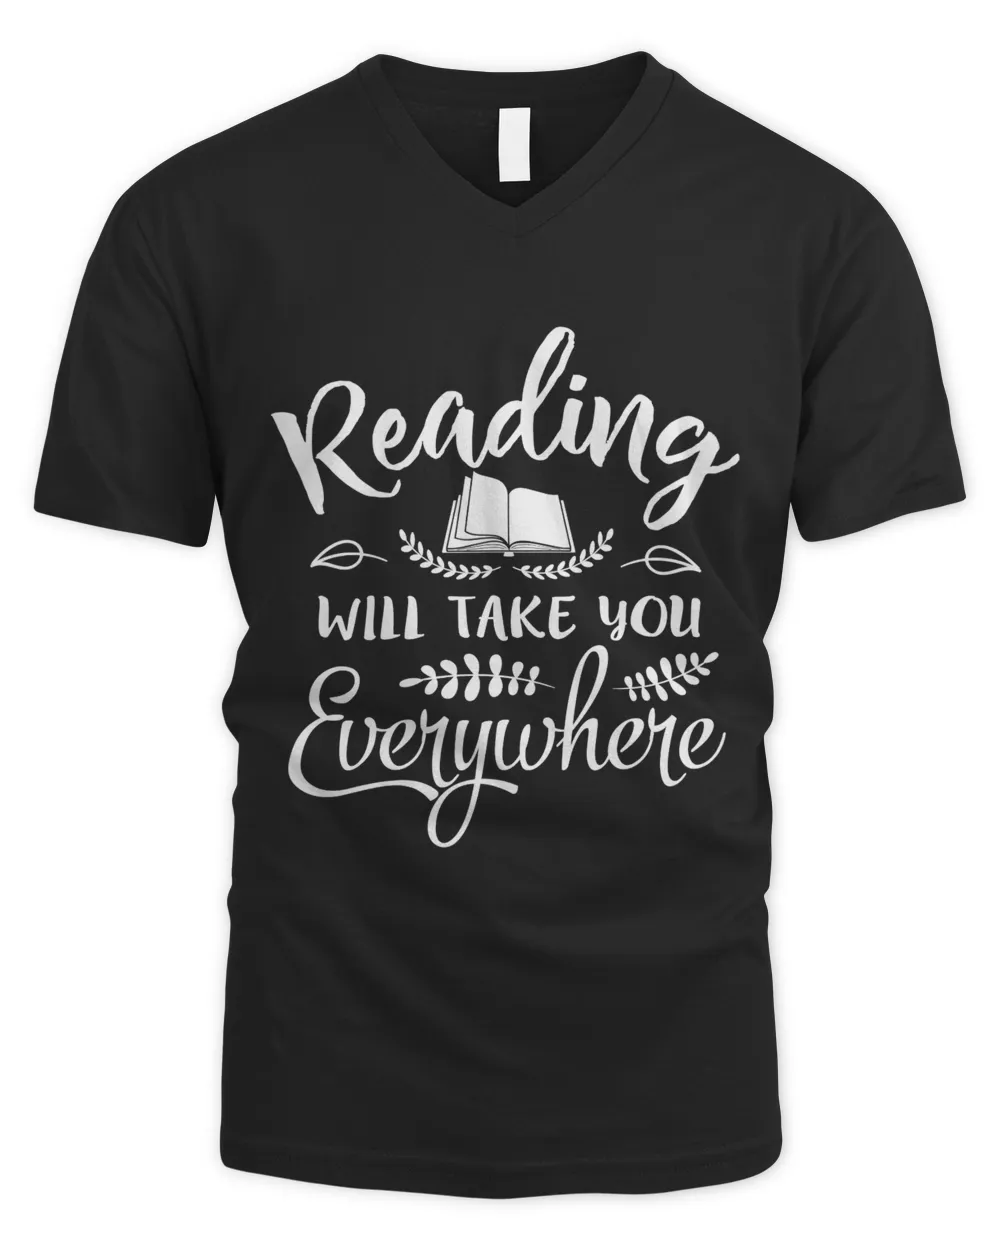 Reading will take you everywhere